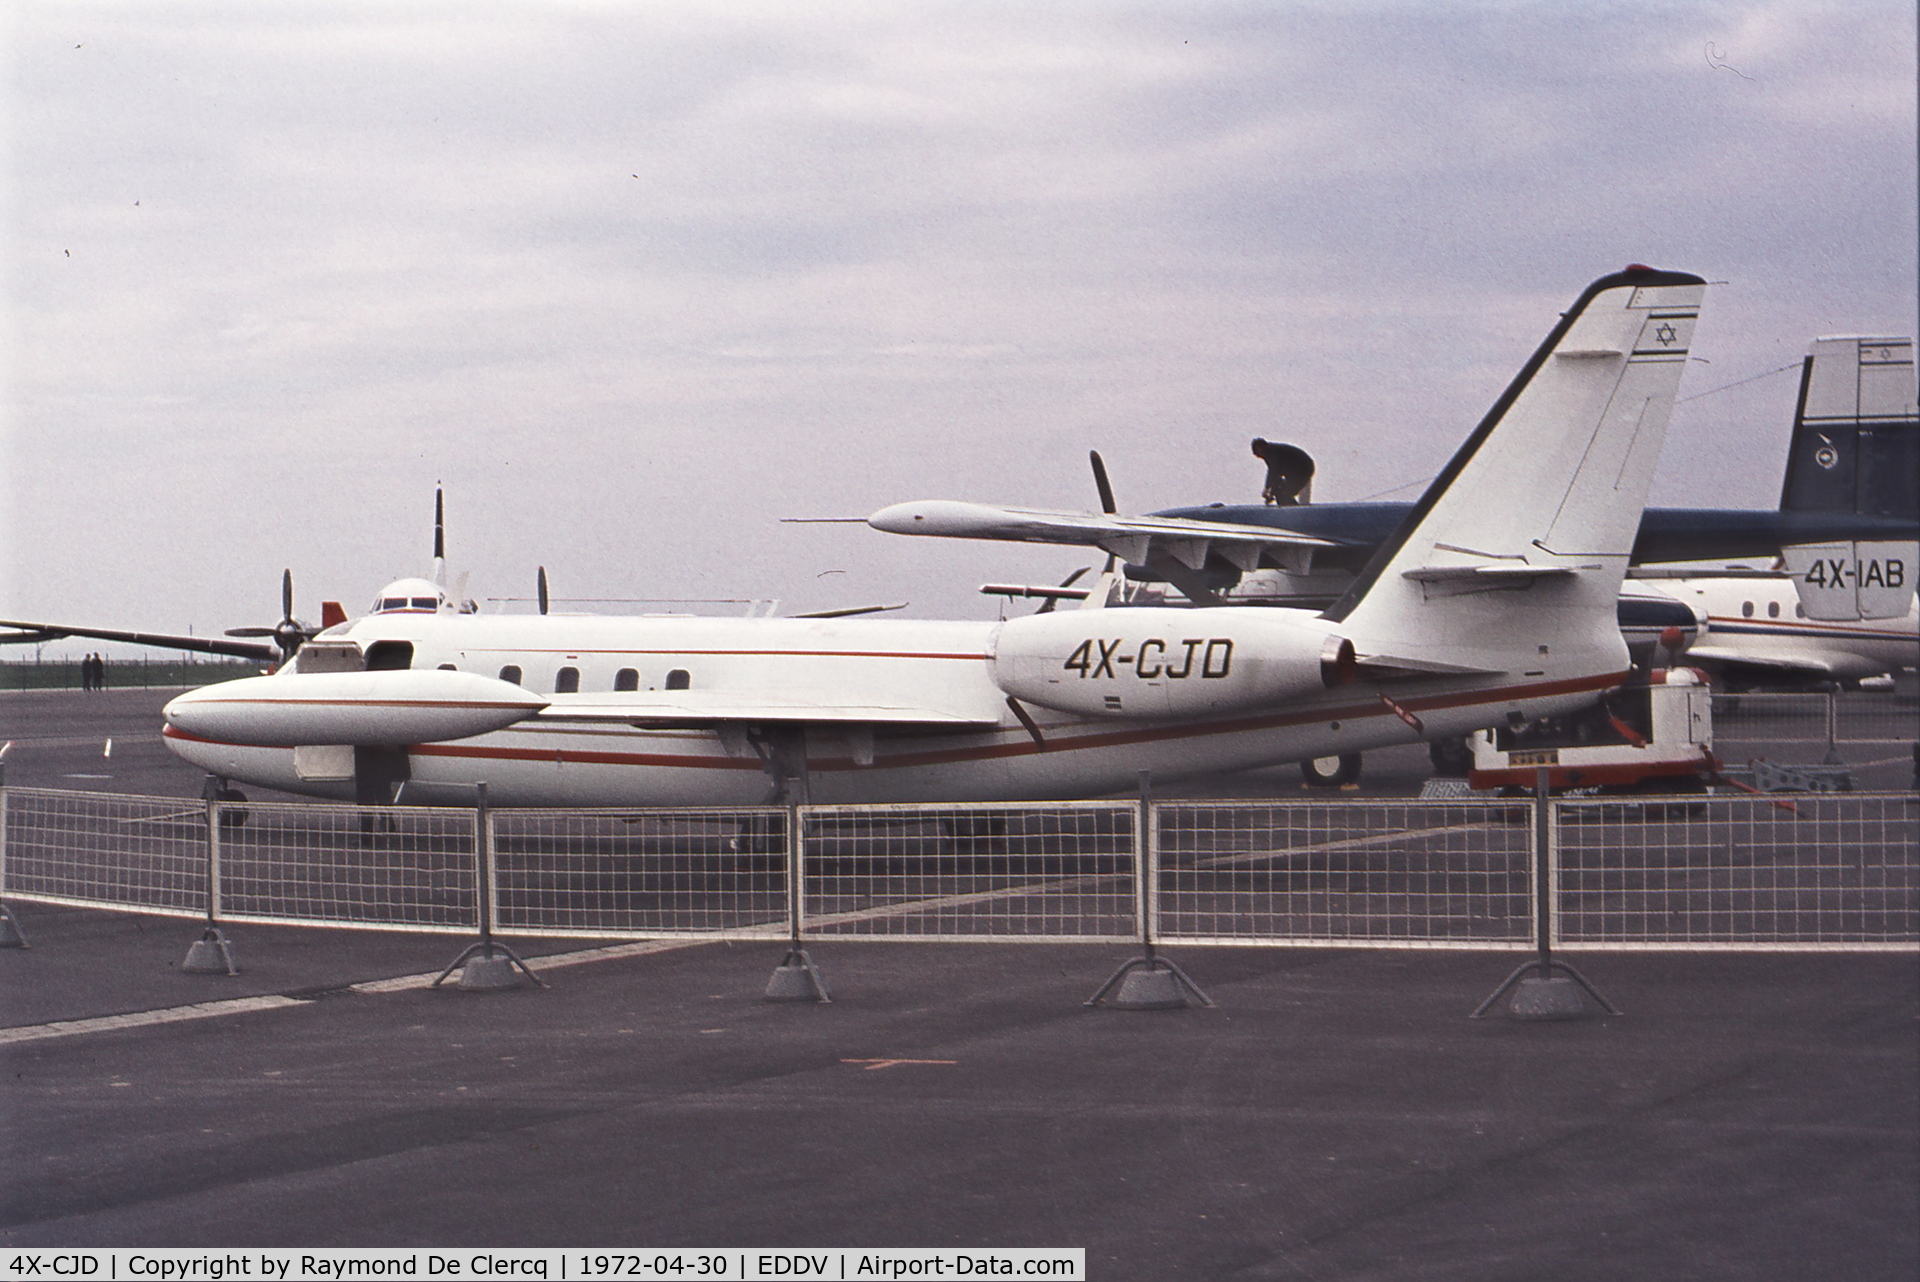 4X-CJD, Israel Aircraft Industries 1123 Commodore Jet C/N 151, Hannover Messe 1972